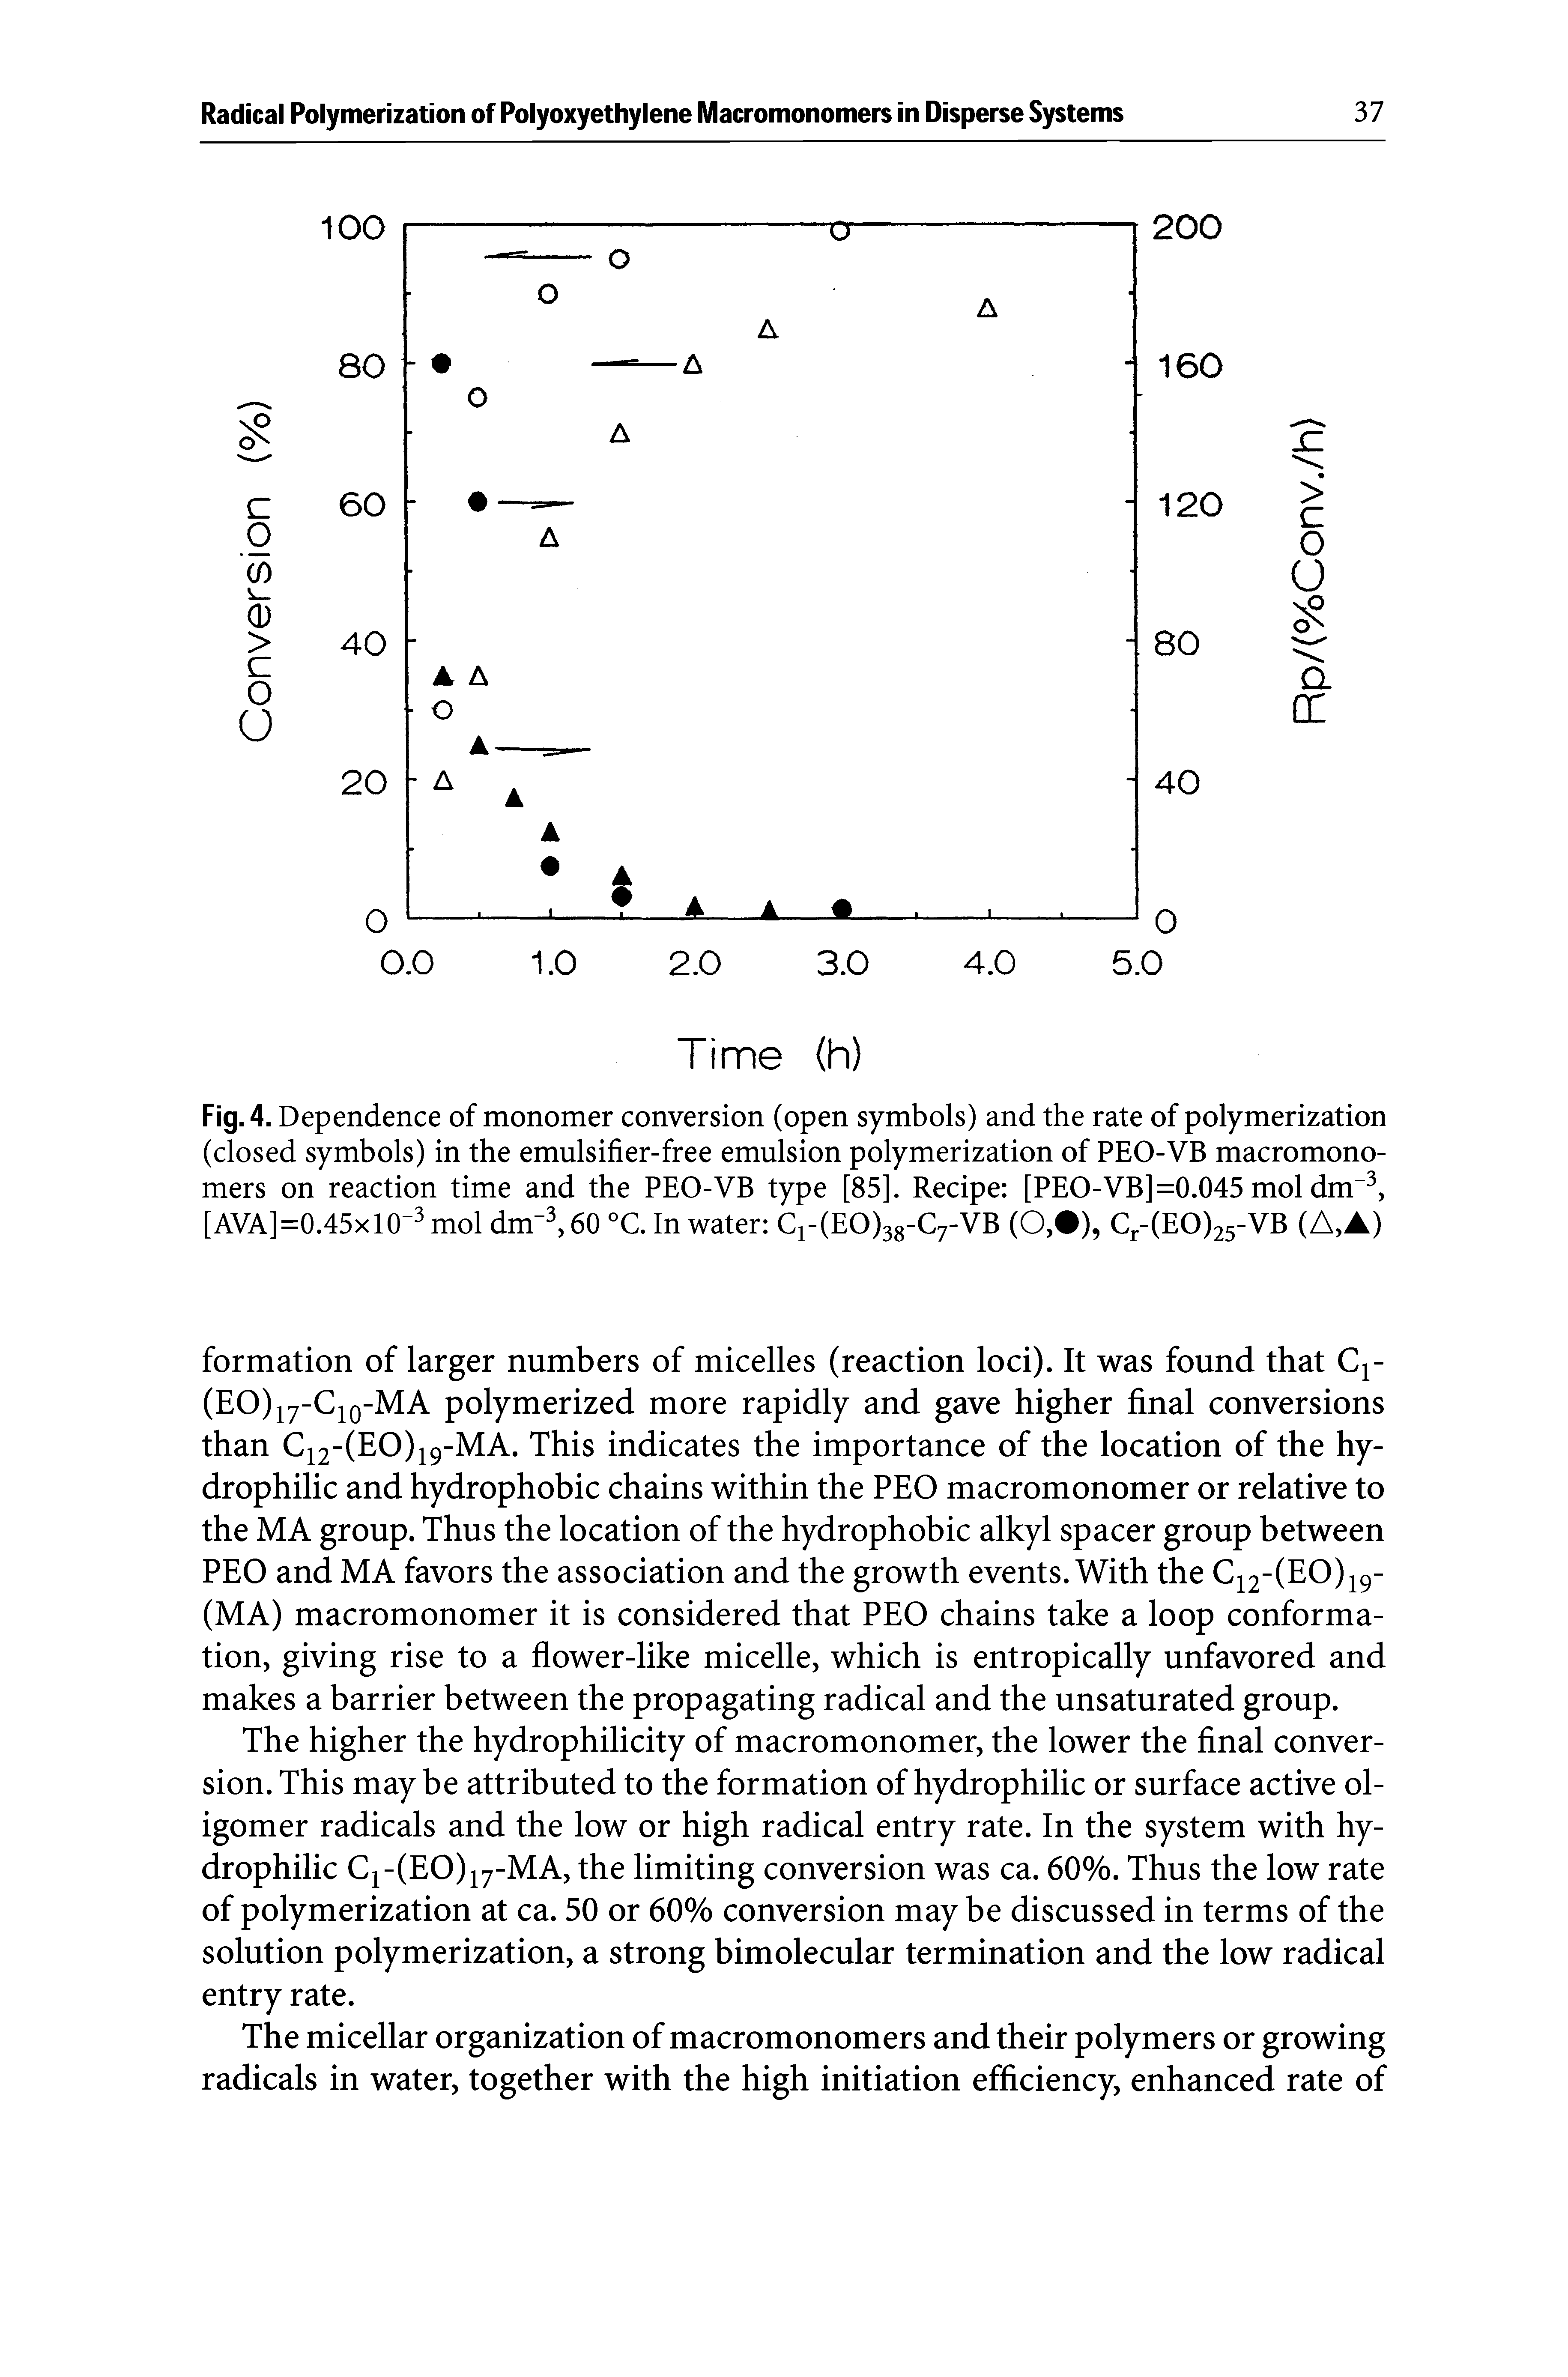 Fig. 4. Dependence of monomer conversion (open symbols) and the rate of polymerization (closed symbols) in the emulsifier-free emulsion polymerization of PEO-VB macromonomers on reaction time and the PEO-VB type [85]. Recipe [PEO-VB] =0.045 mol dm-3, [AVA]=0.45xl0-3 mol dm"3,60 °C. In water Cr(EO)38-C7-VB (O, ), Cr-(EO)25-VB (A,A)...